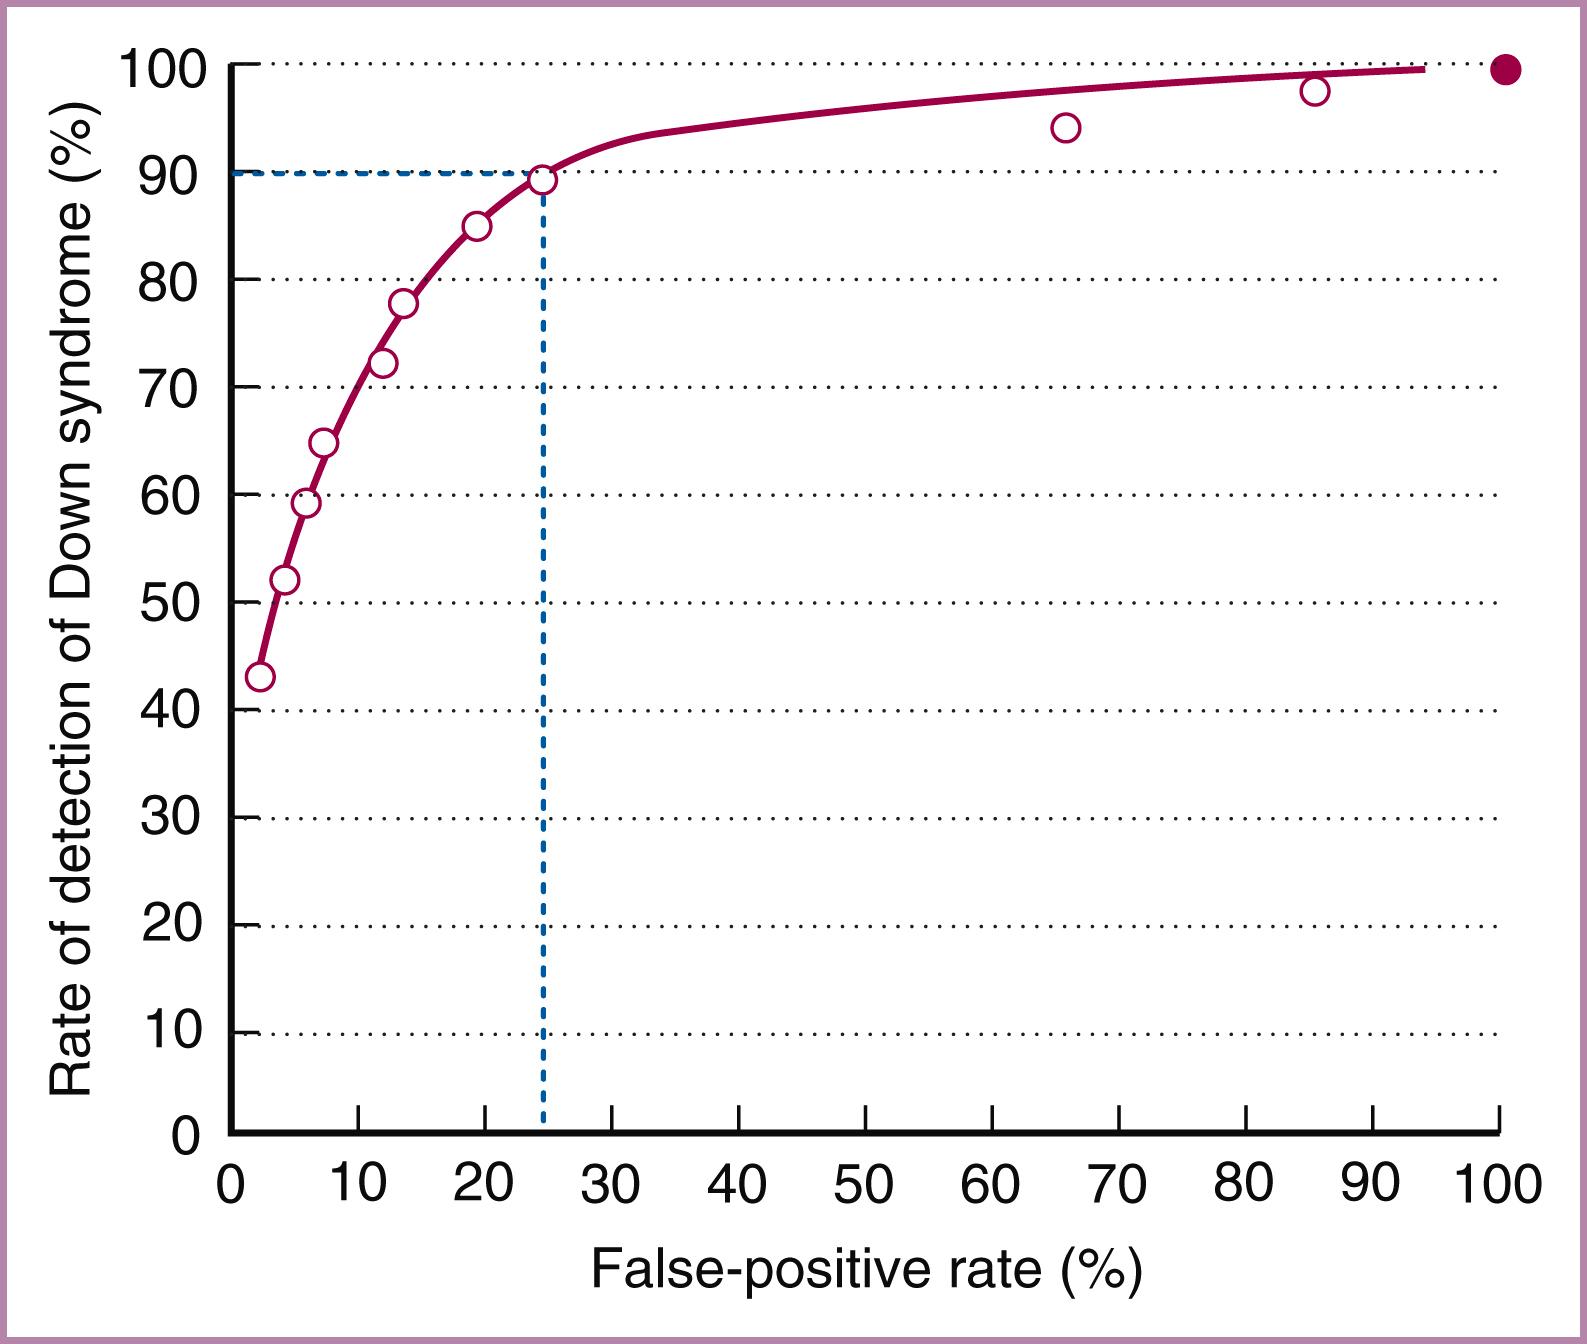 Figure 30.1, Receiver operating characteristic curve for Down syndrome detection.